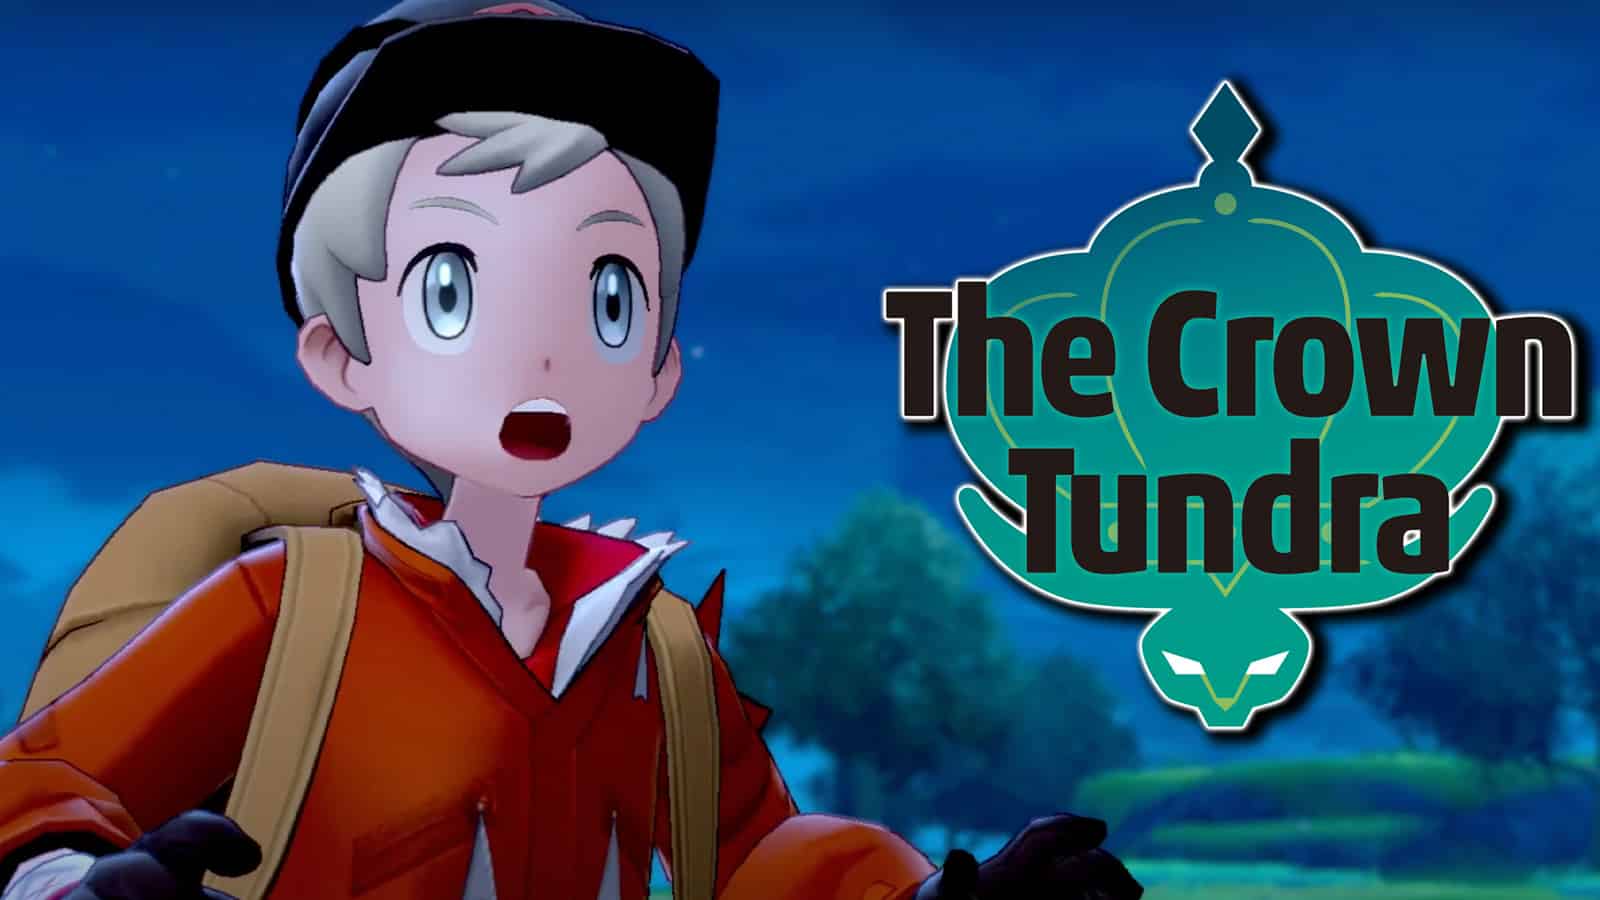 Pokémon Sword and Shield - How to start the Crown Tundra DLC